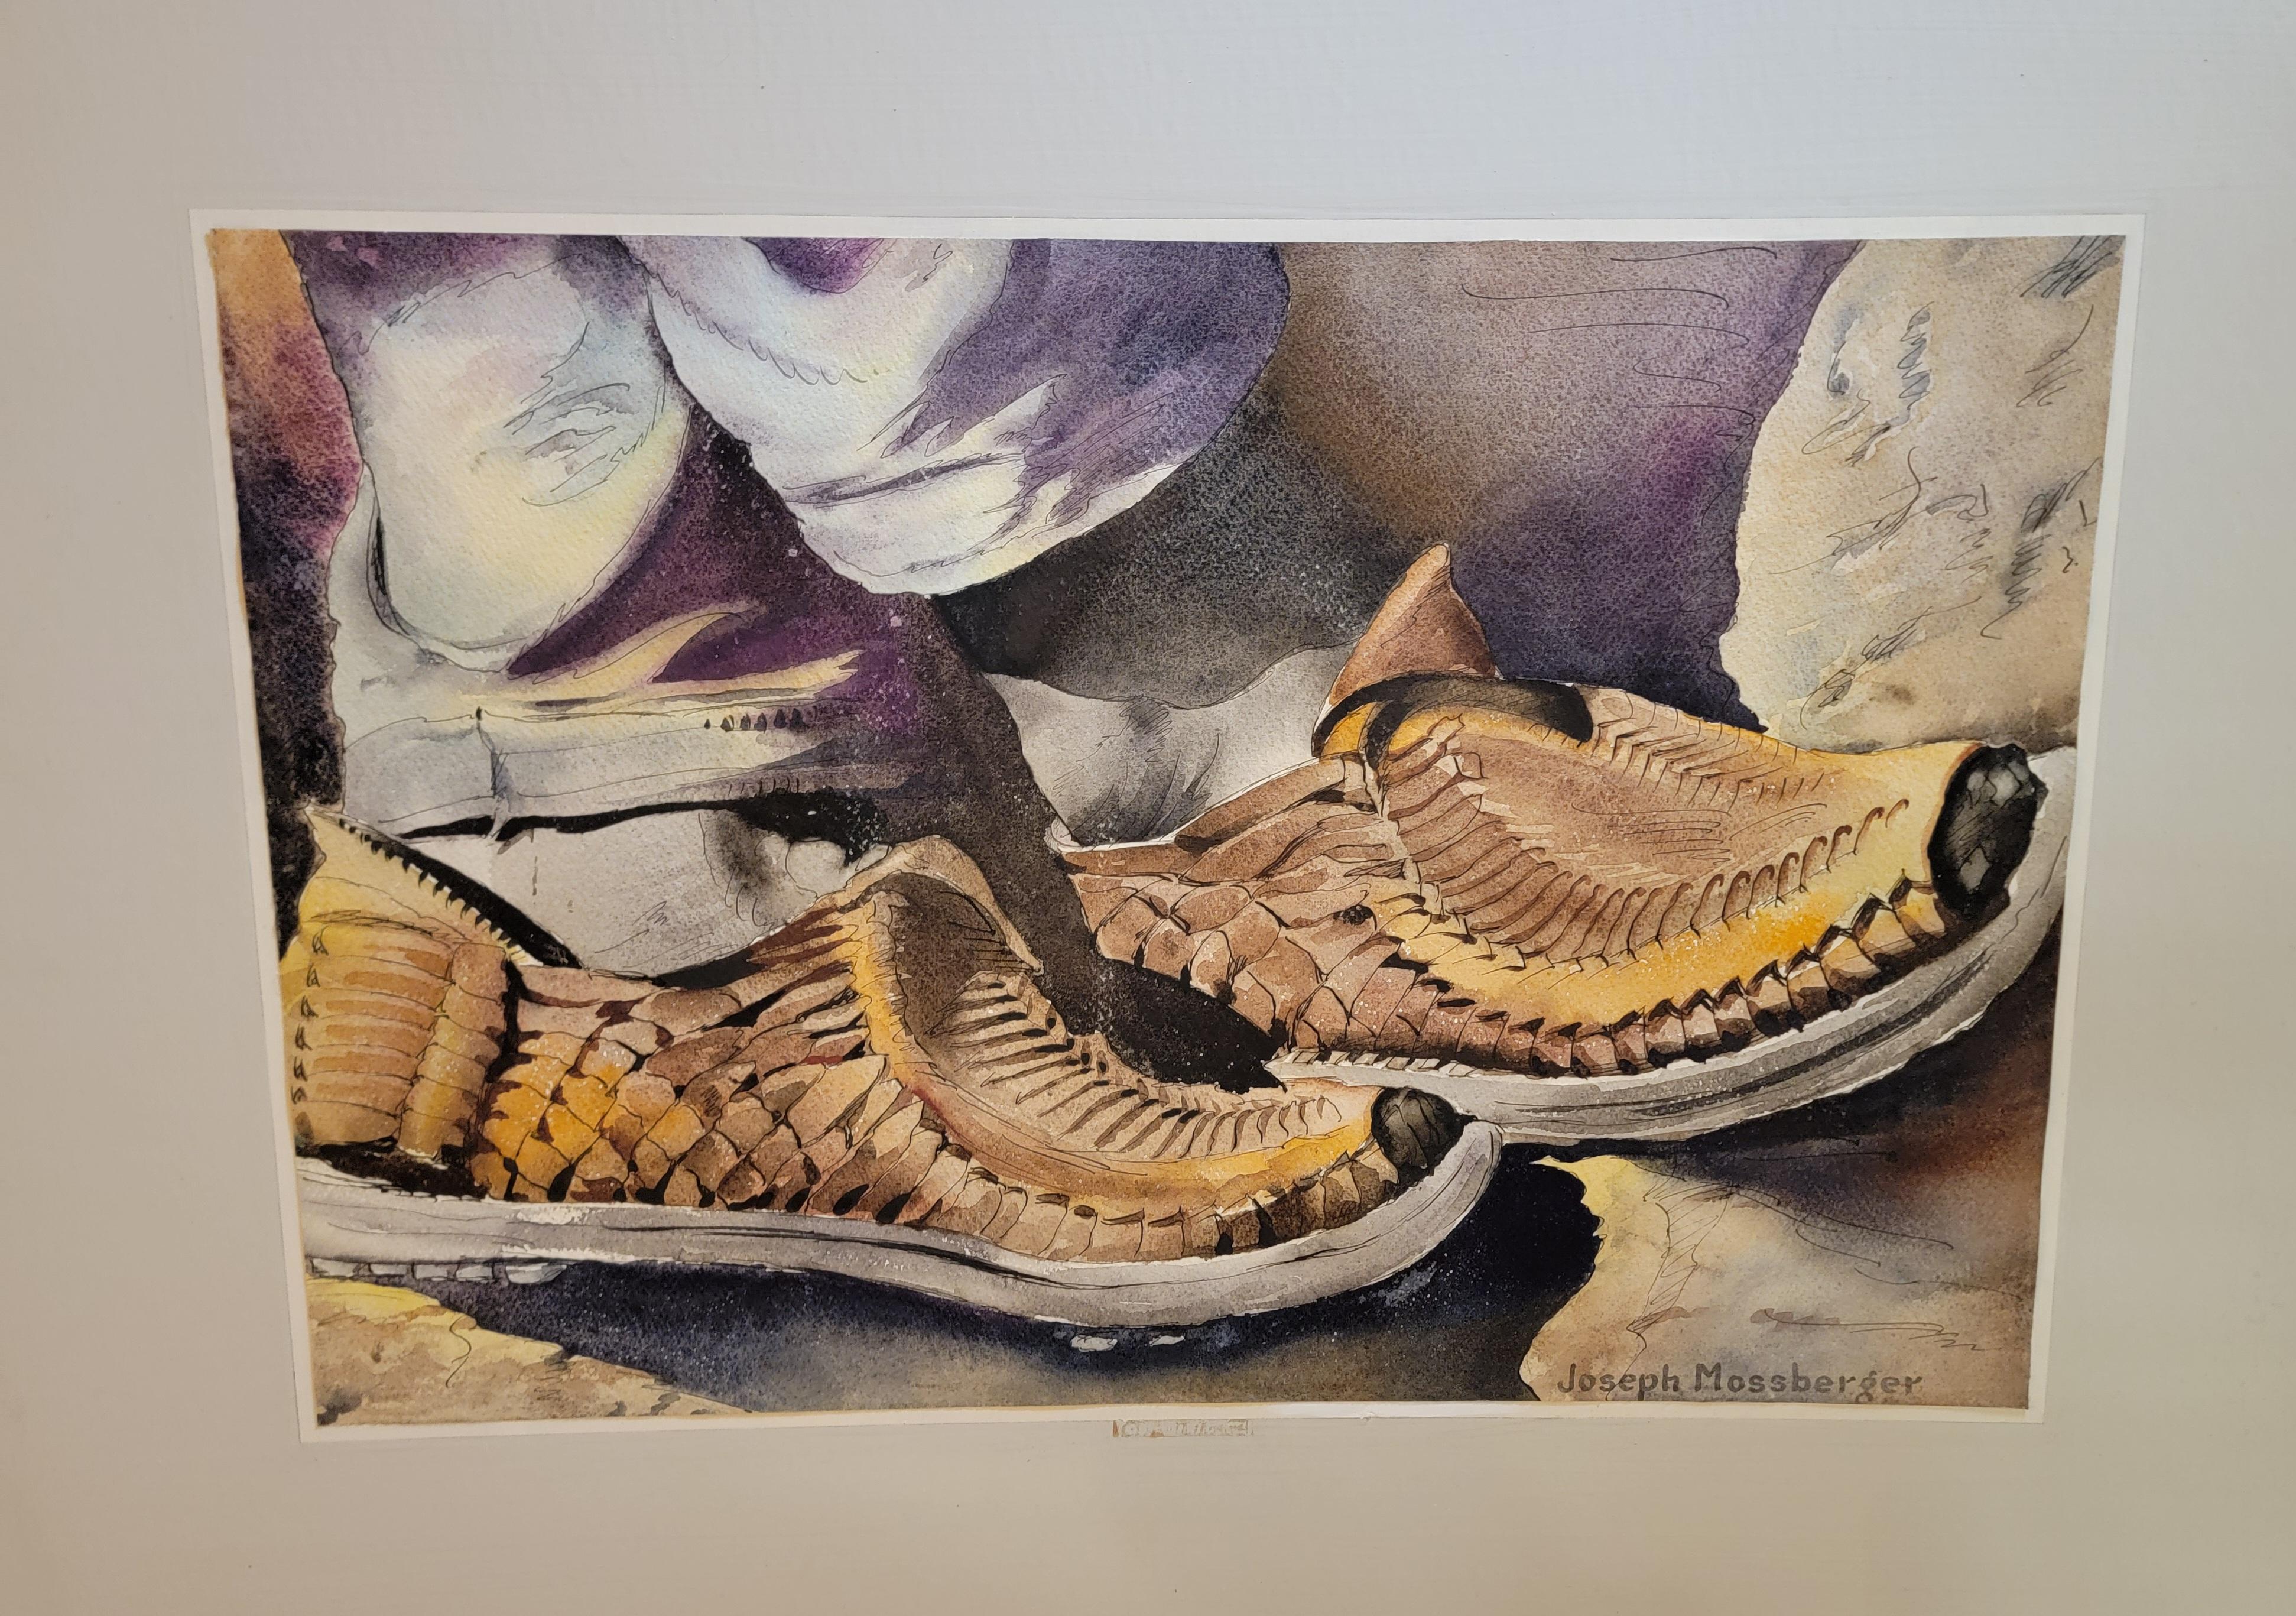 Original watercolor painting by California Artist Joseph Mossberger. Depicting woven leather Mexican sandals. Painted on paper glued to cardboard backing. Measuring 24.75